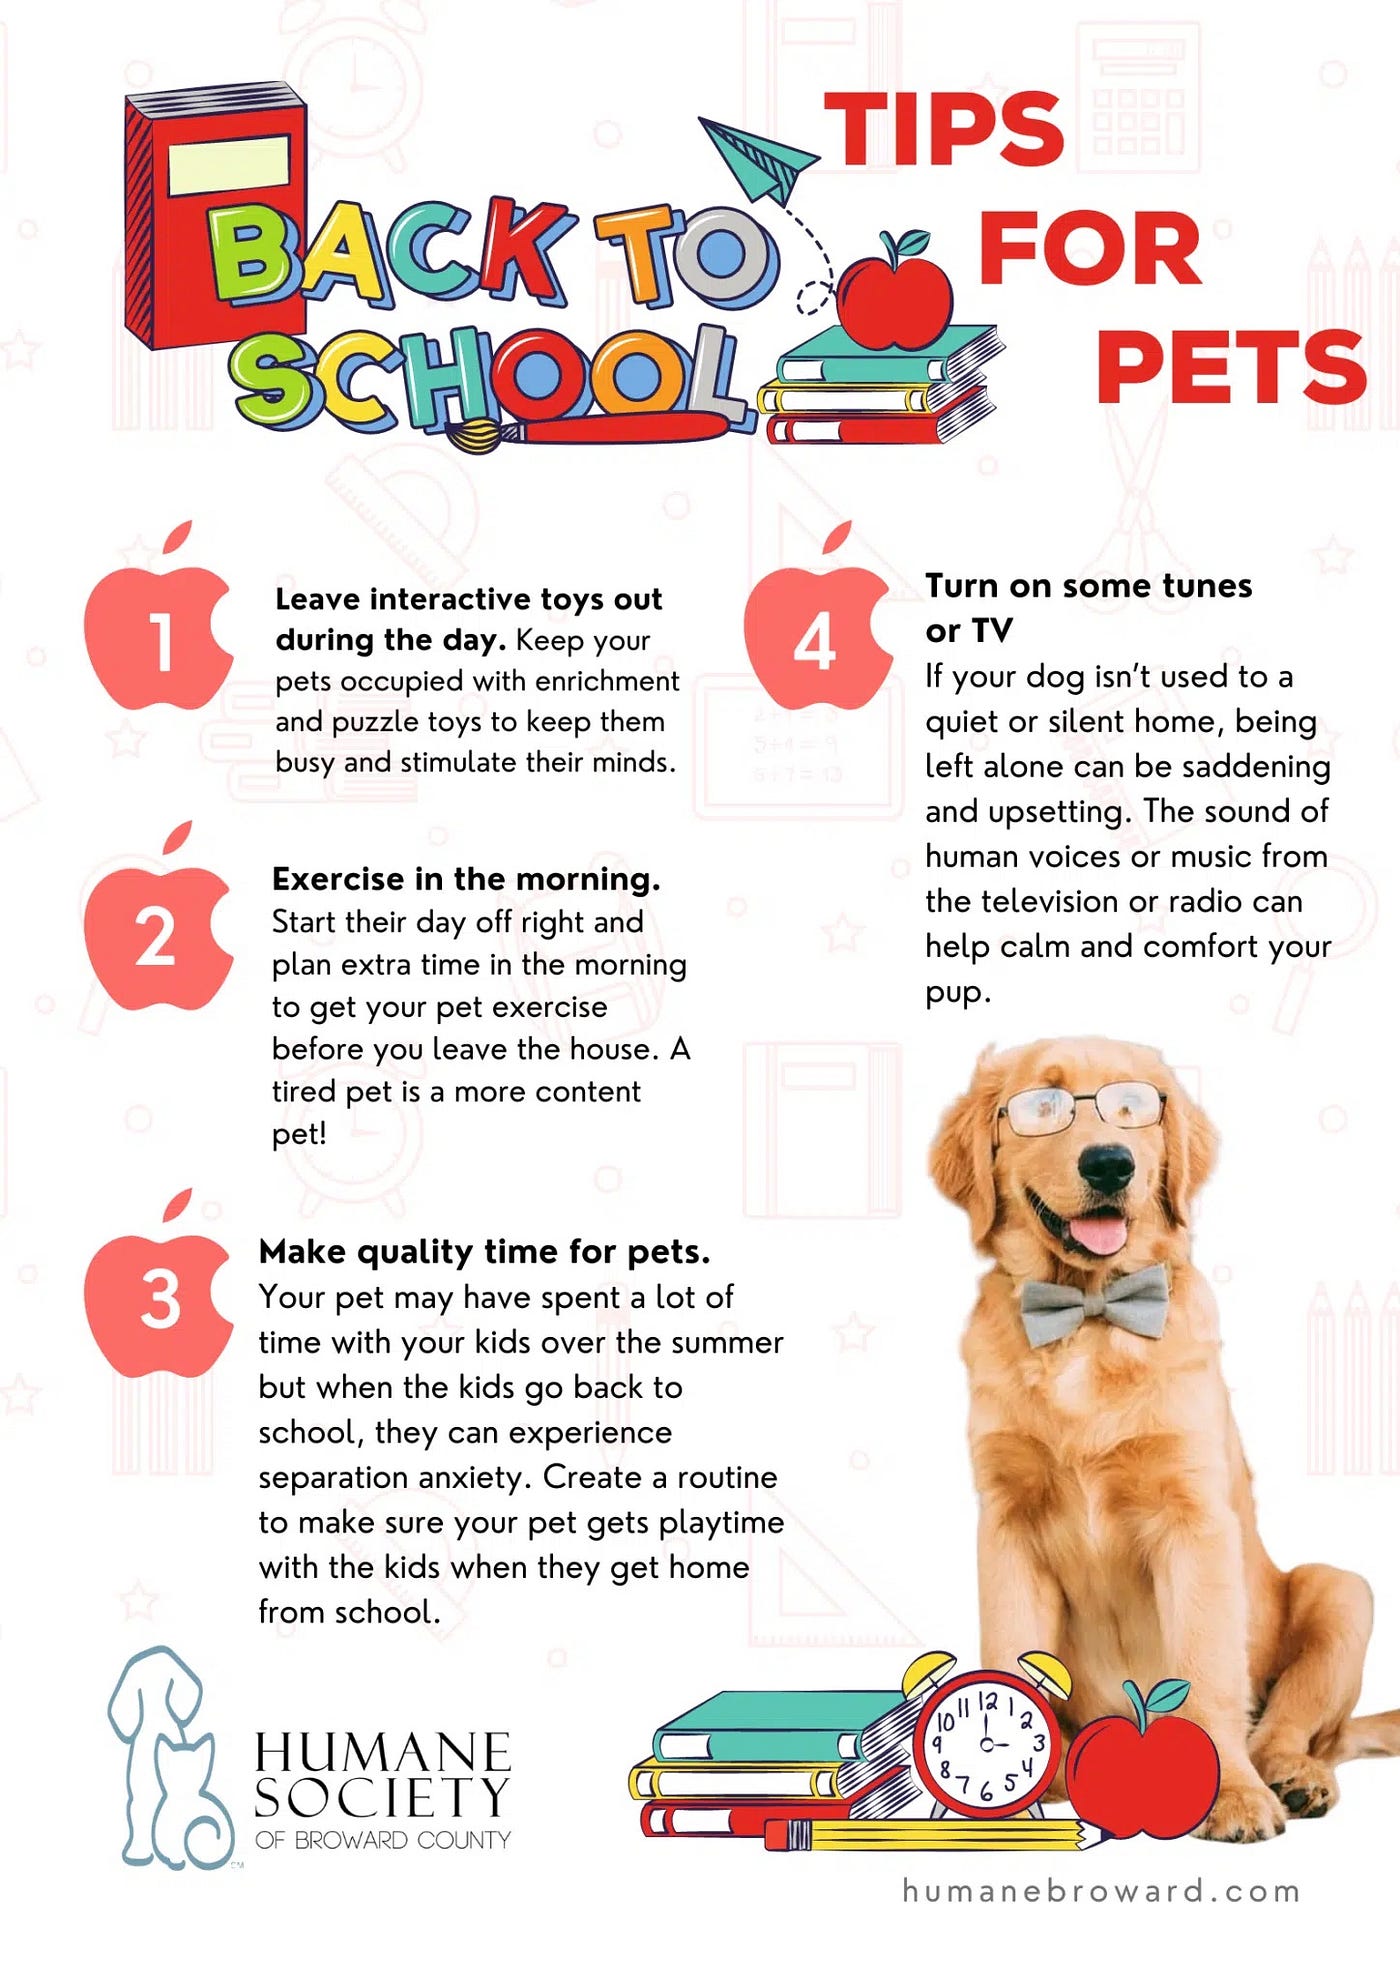 10 Ways to Keep Your Dog Busy During the Day